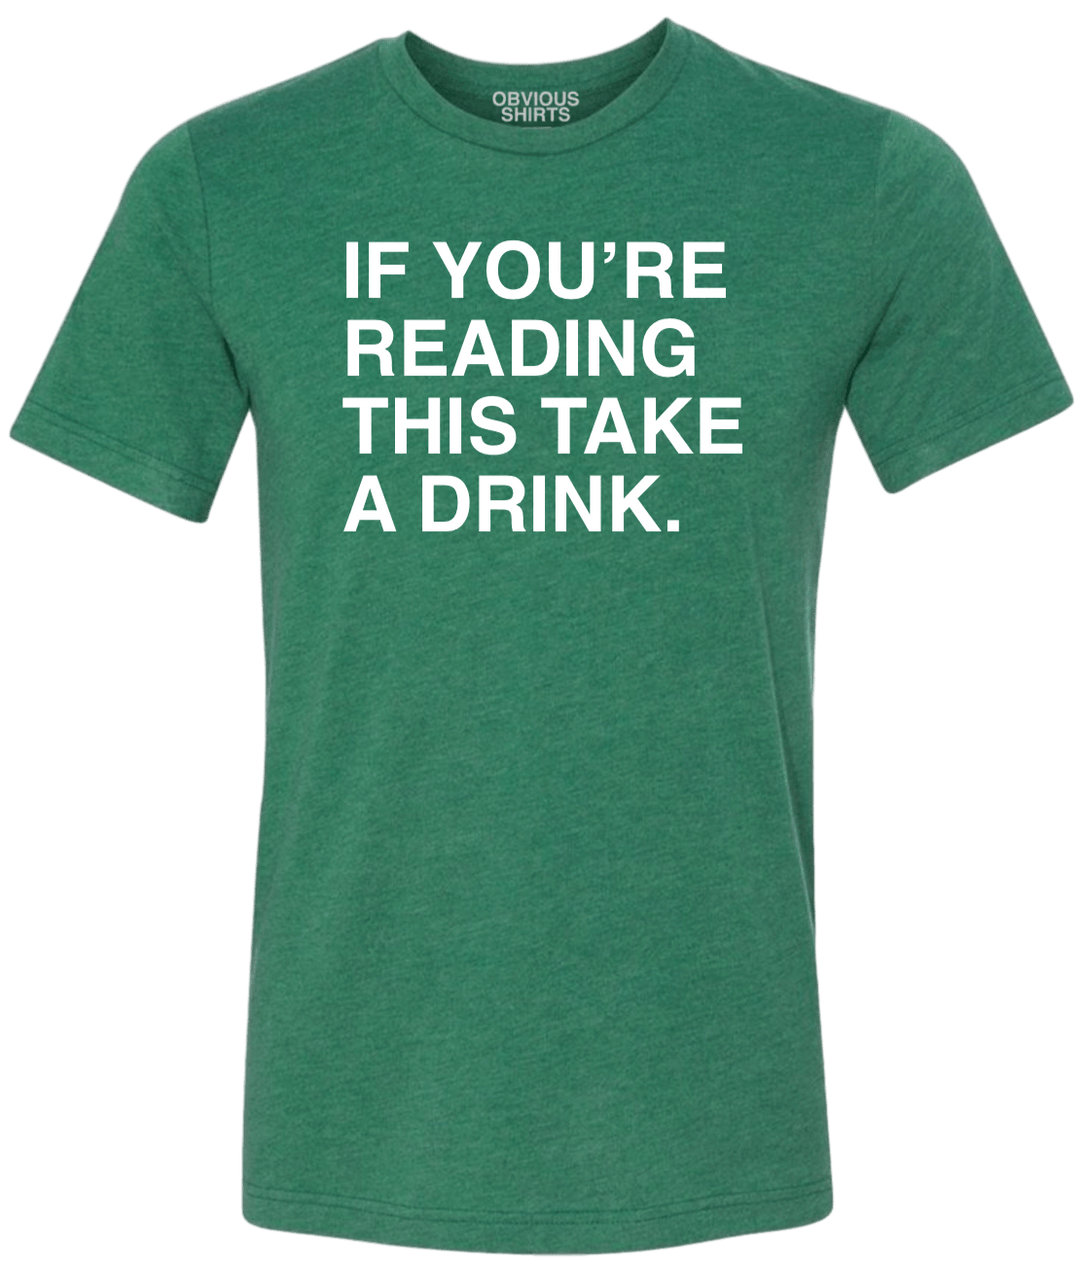 IF YOU'RE READING THIS TAKE A DRINK. - OBVIOUS SHIRTS